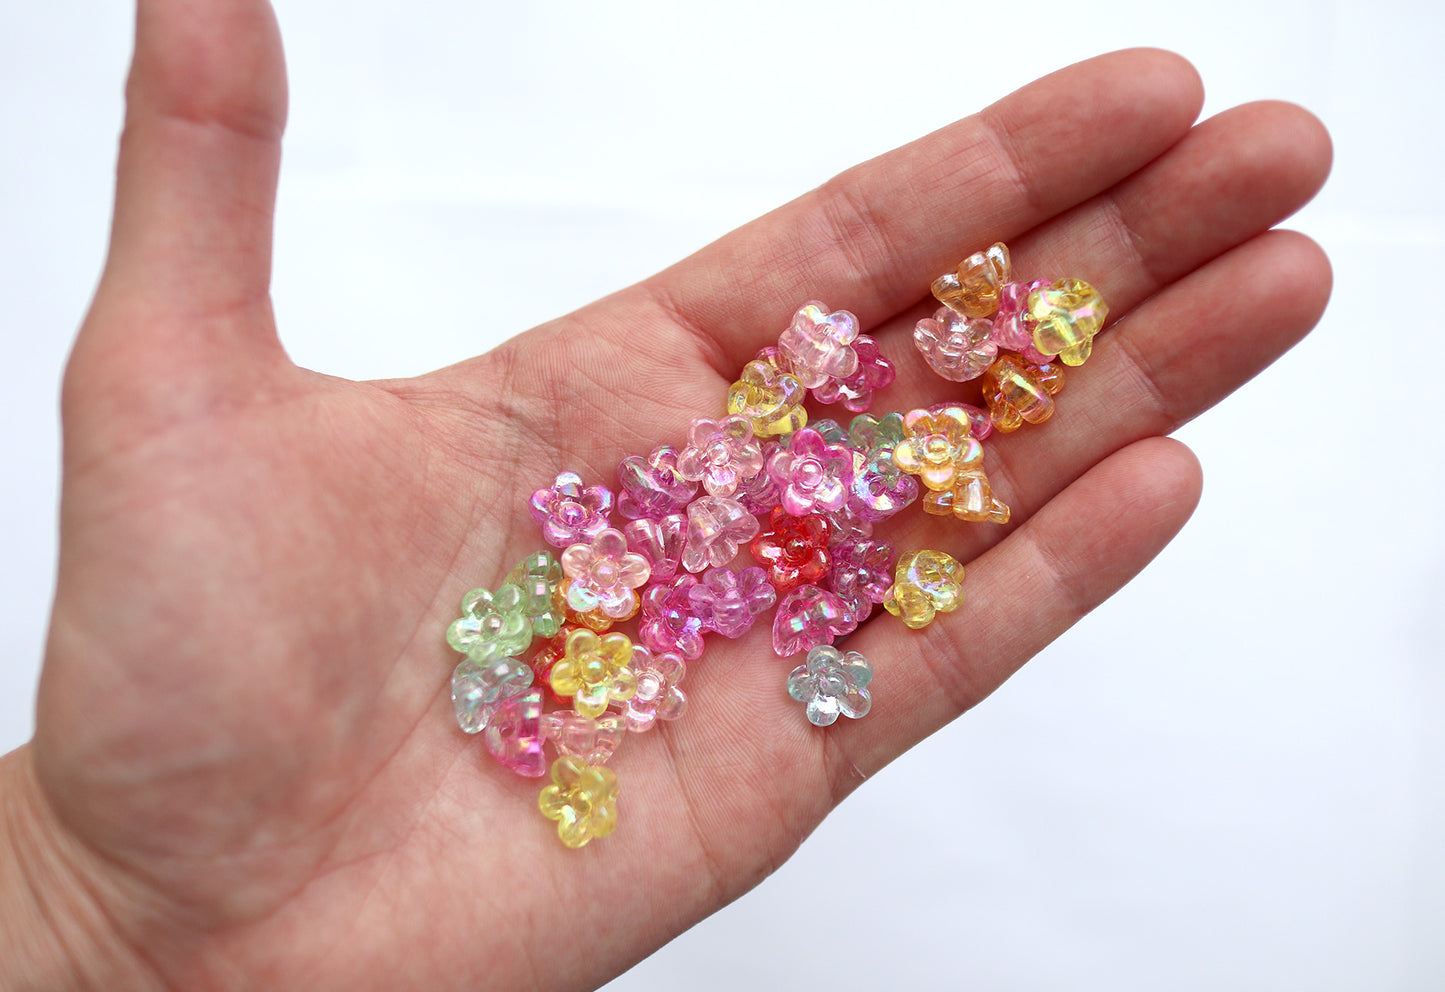 Flower Beads - 10mm Tiny 3D Flower AB Bead with Back Hole Iridescent Transparent Color Plastic Acrylic or Resin Beads – 150 pc set